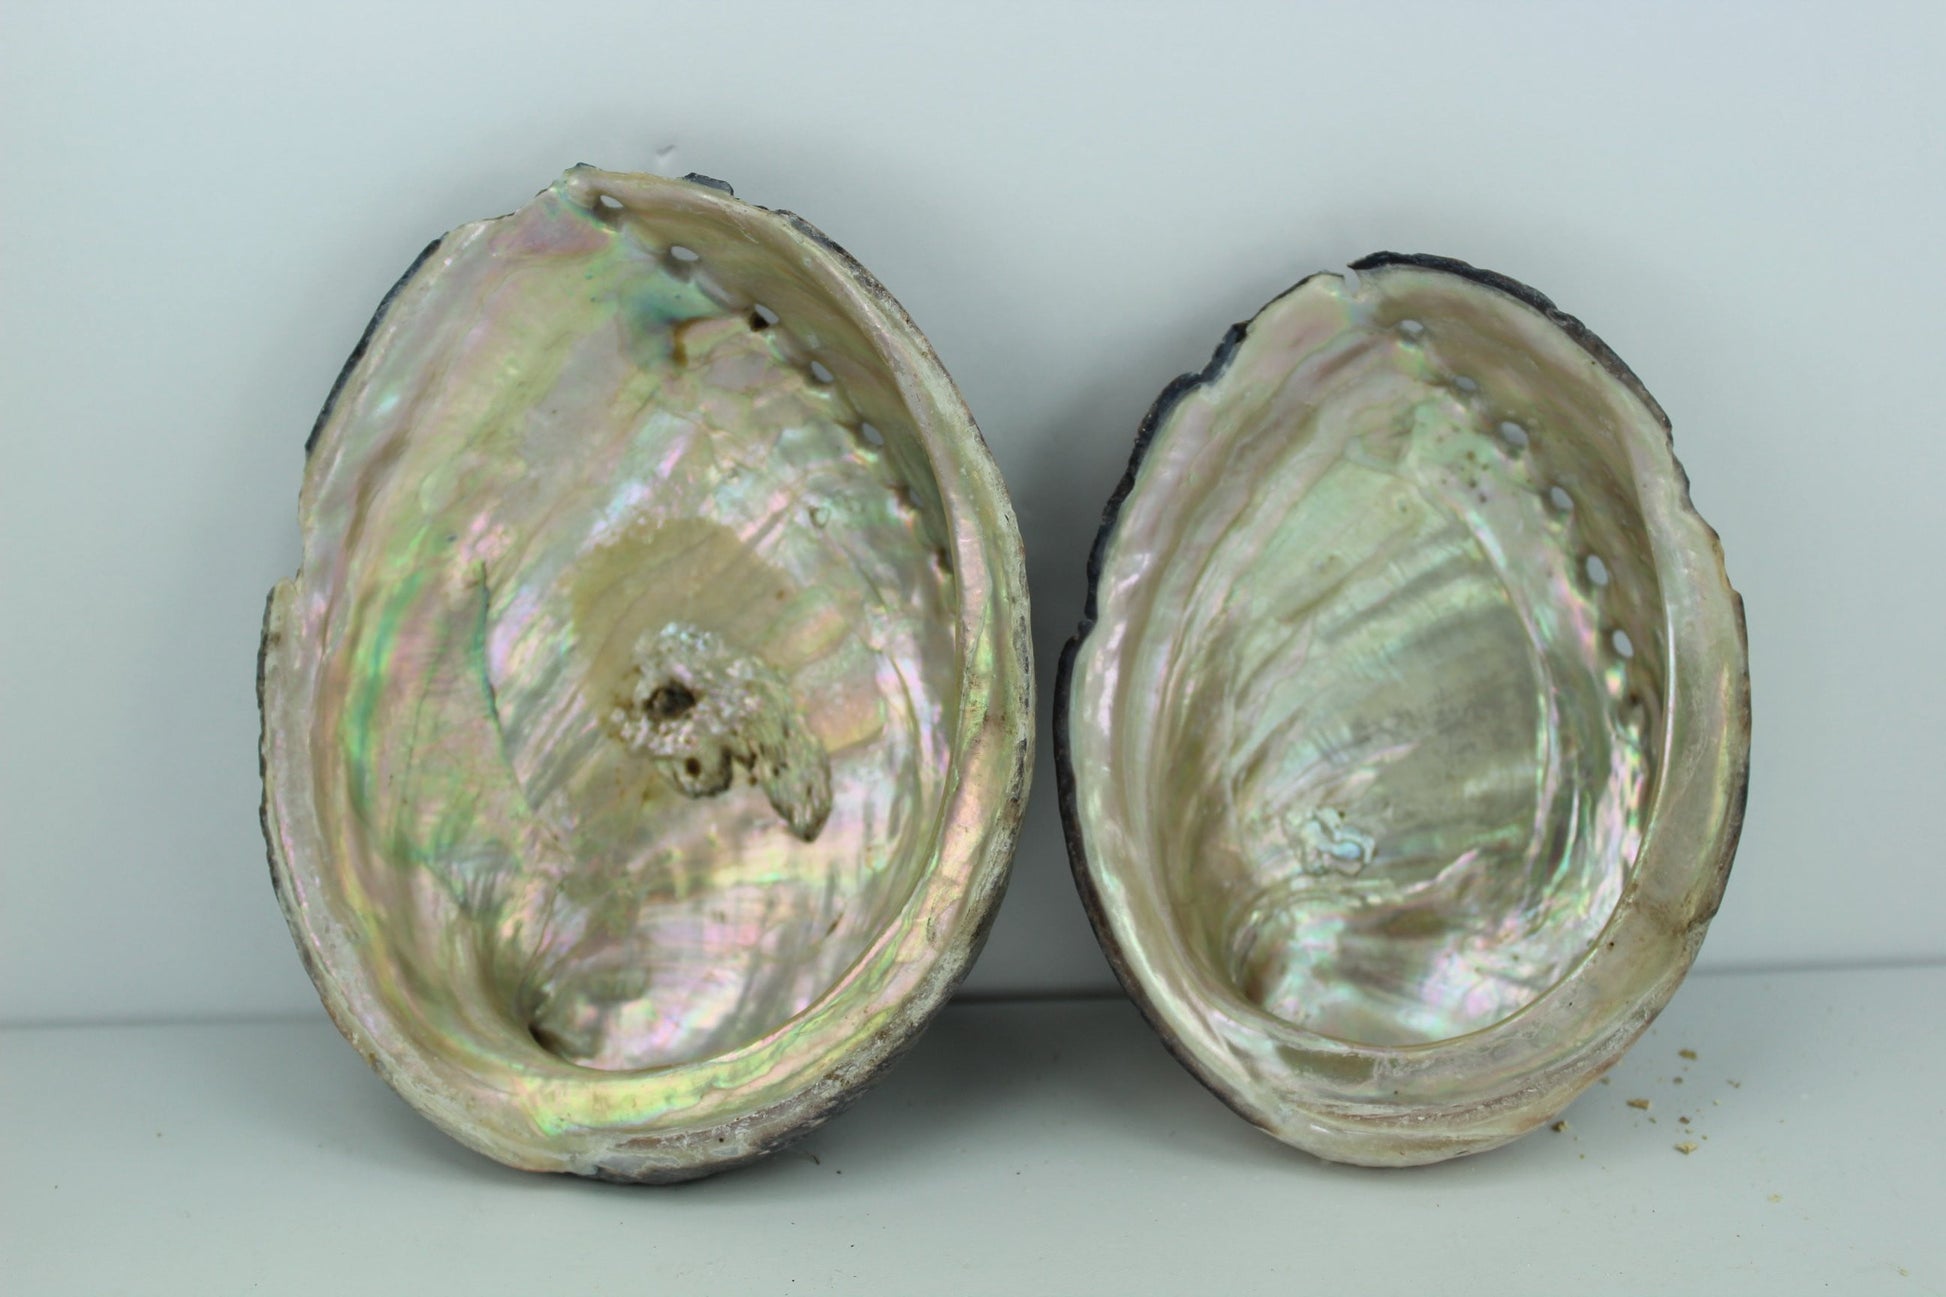 Black Abalone Shells 2 Vintage Rainbow Iridescent  5 1/4"  5" Estate Collection Shell Art Collectibles florida